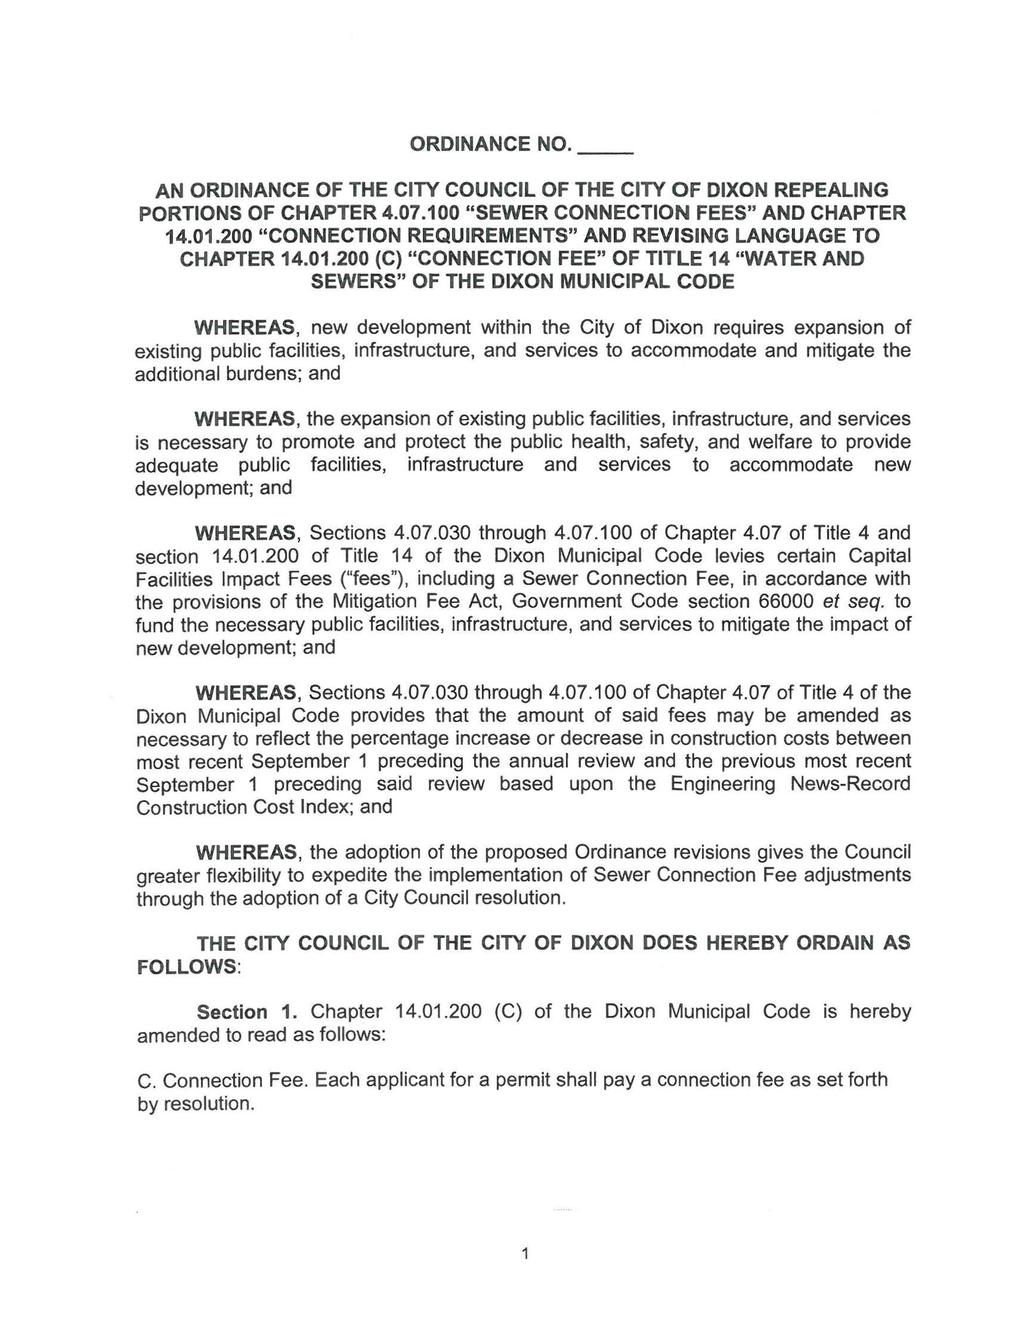 ORDINANCE NO. AN ORDINANCE OF THE CITY COUNCIL OF THE CITY OF DIXON REPEALING PORTIONS OF CHAPTER 4.07.100 "SEWER CONNECTION FEES" AND CHAPTER 14.01.